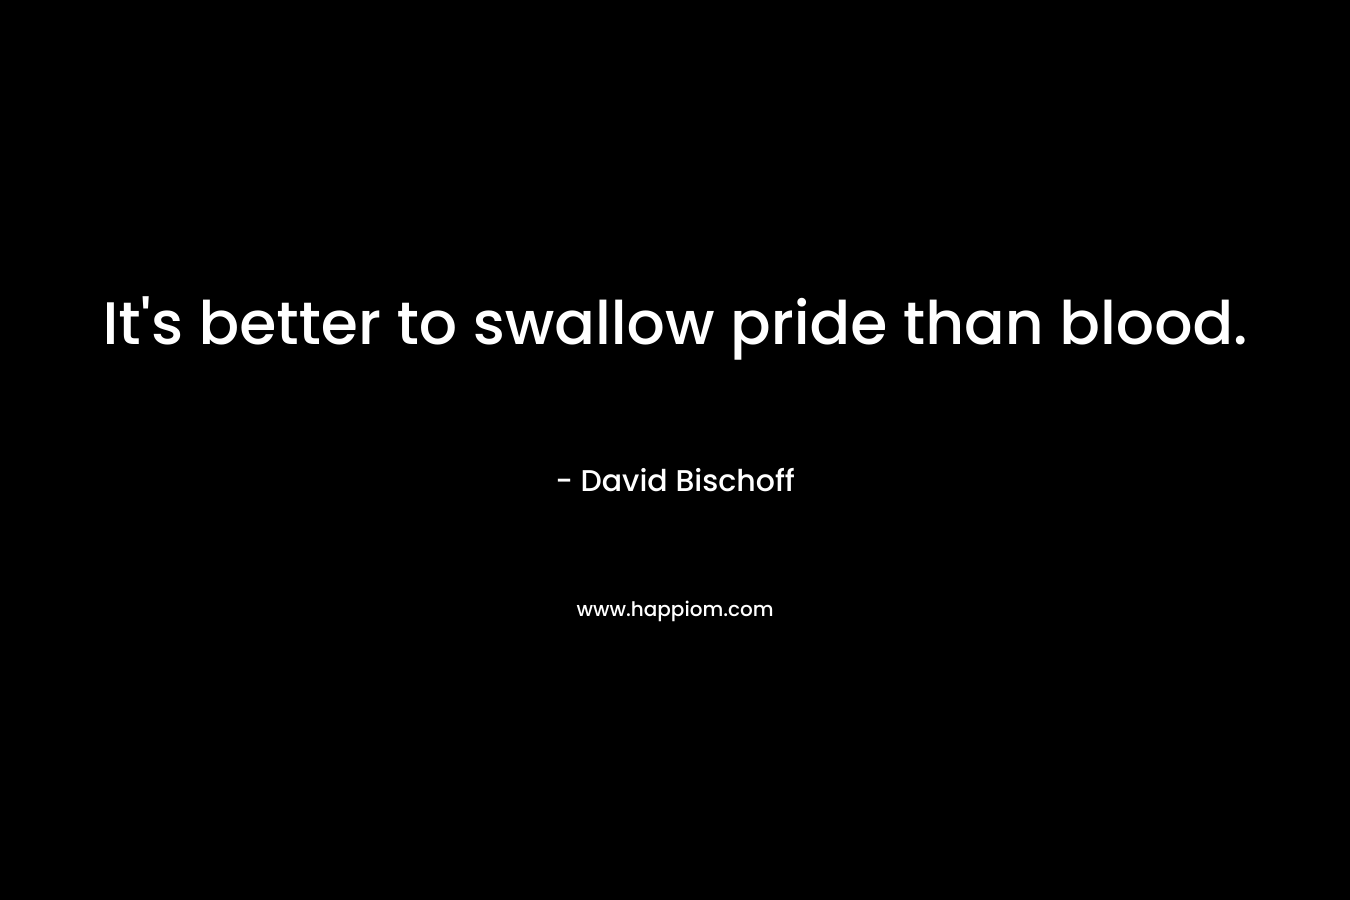 It's better to swallow pride than blood.